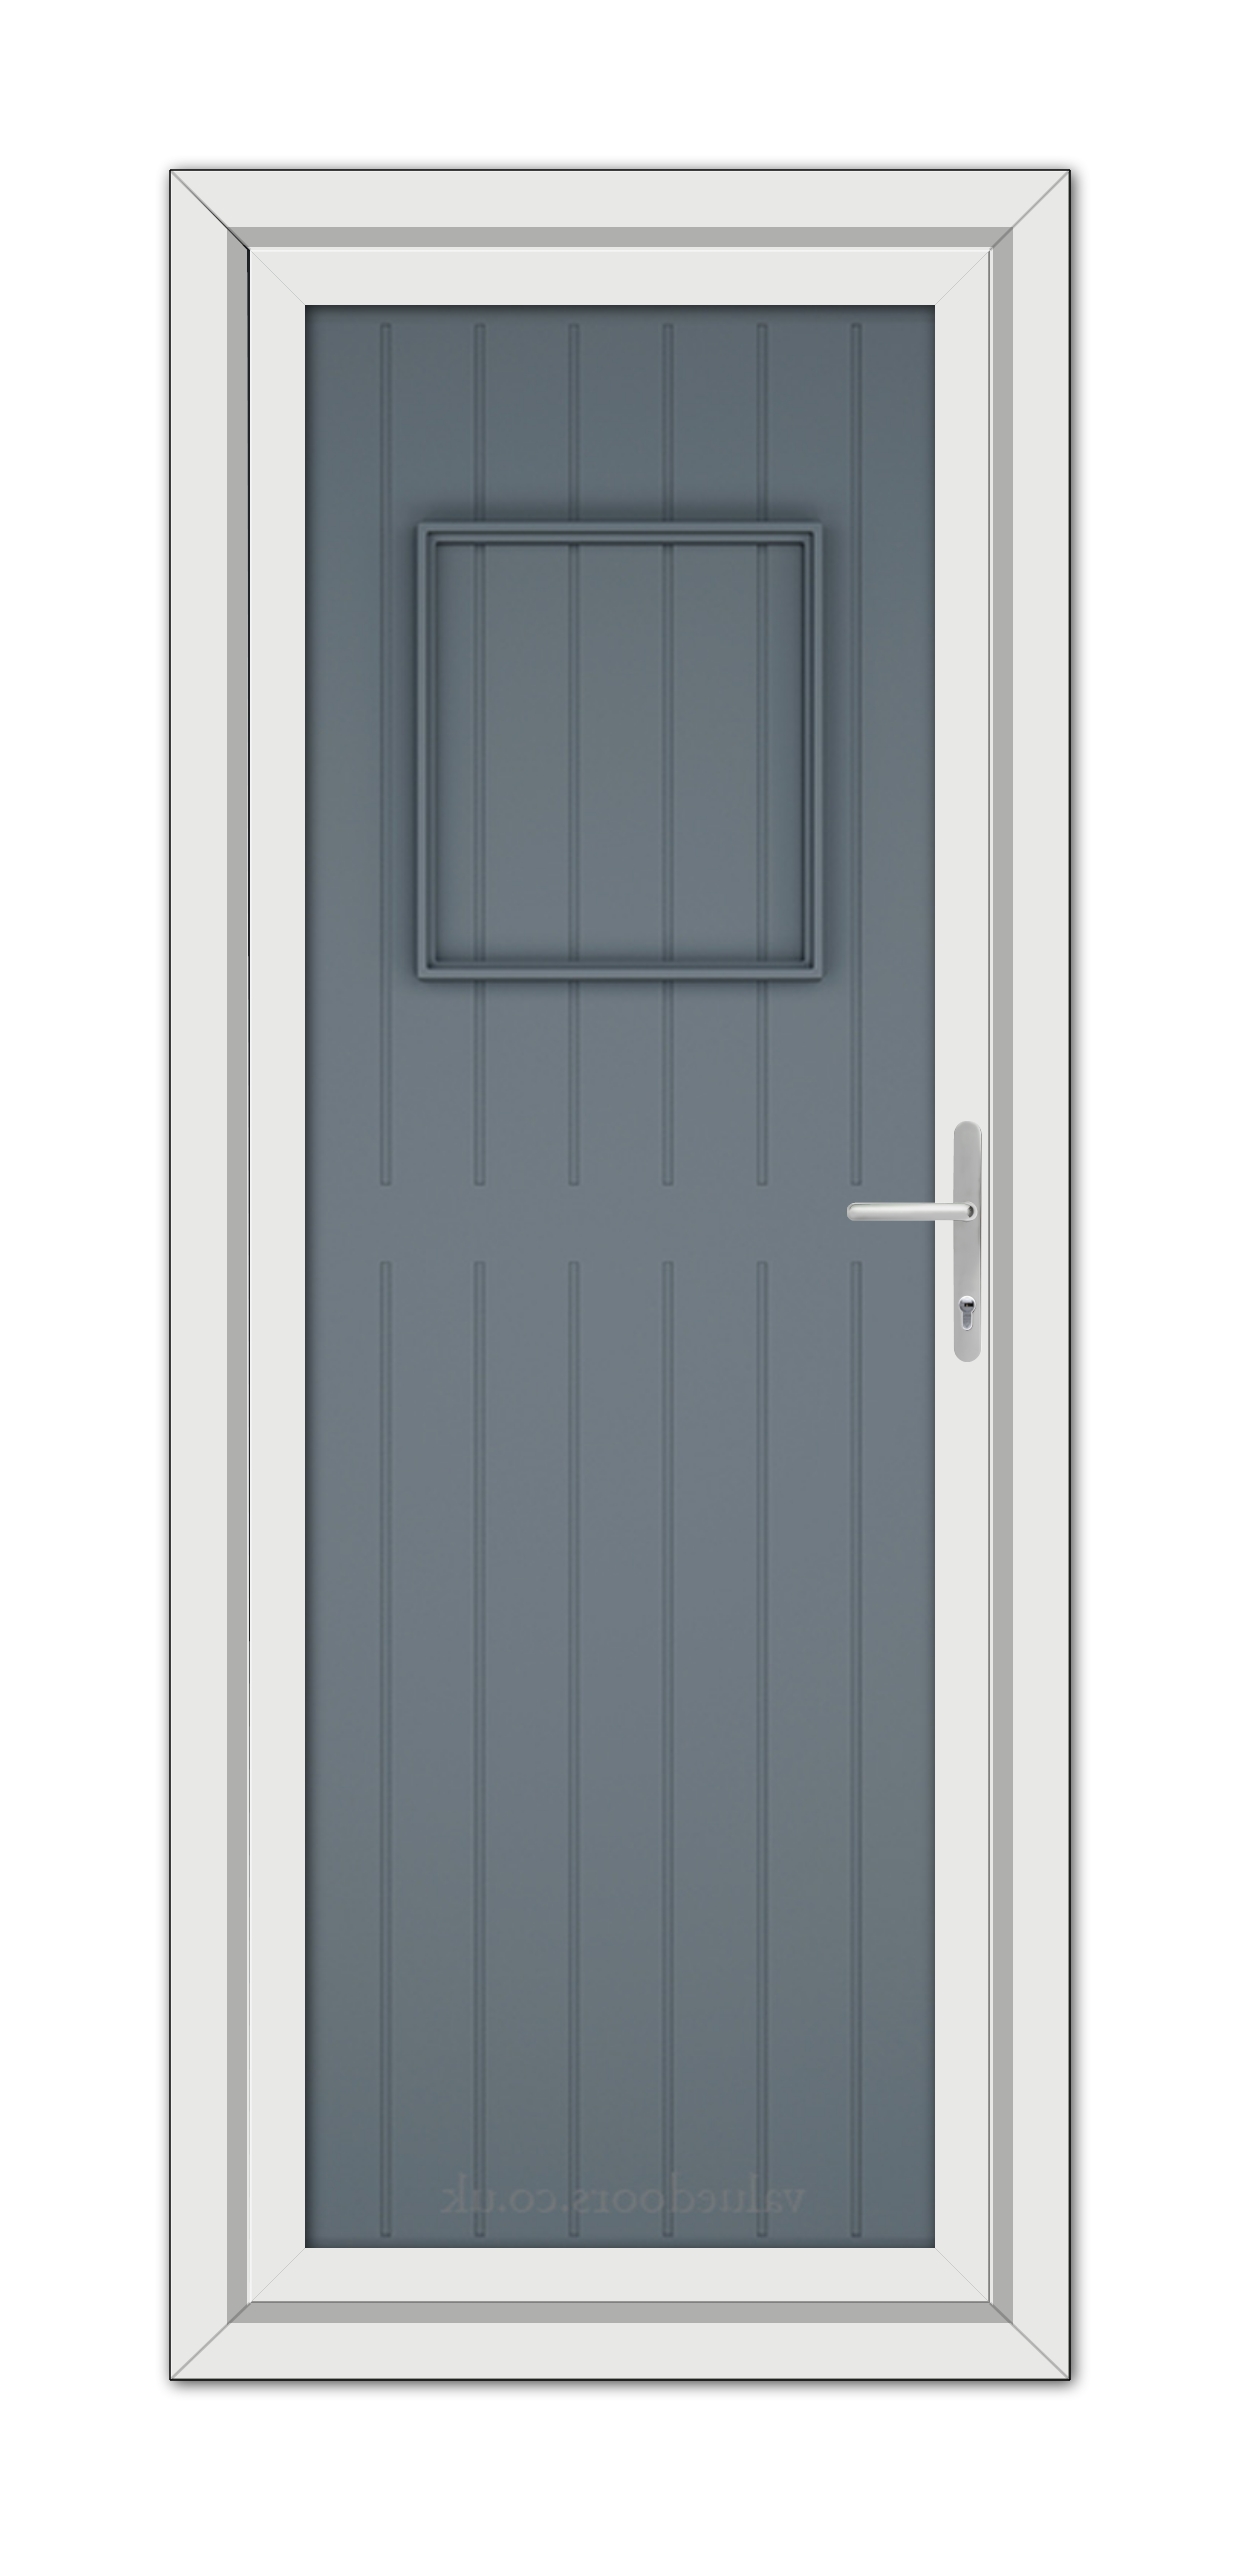 A Slate Grey Chatsworth Solid uPVC Door with a window.